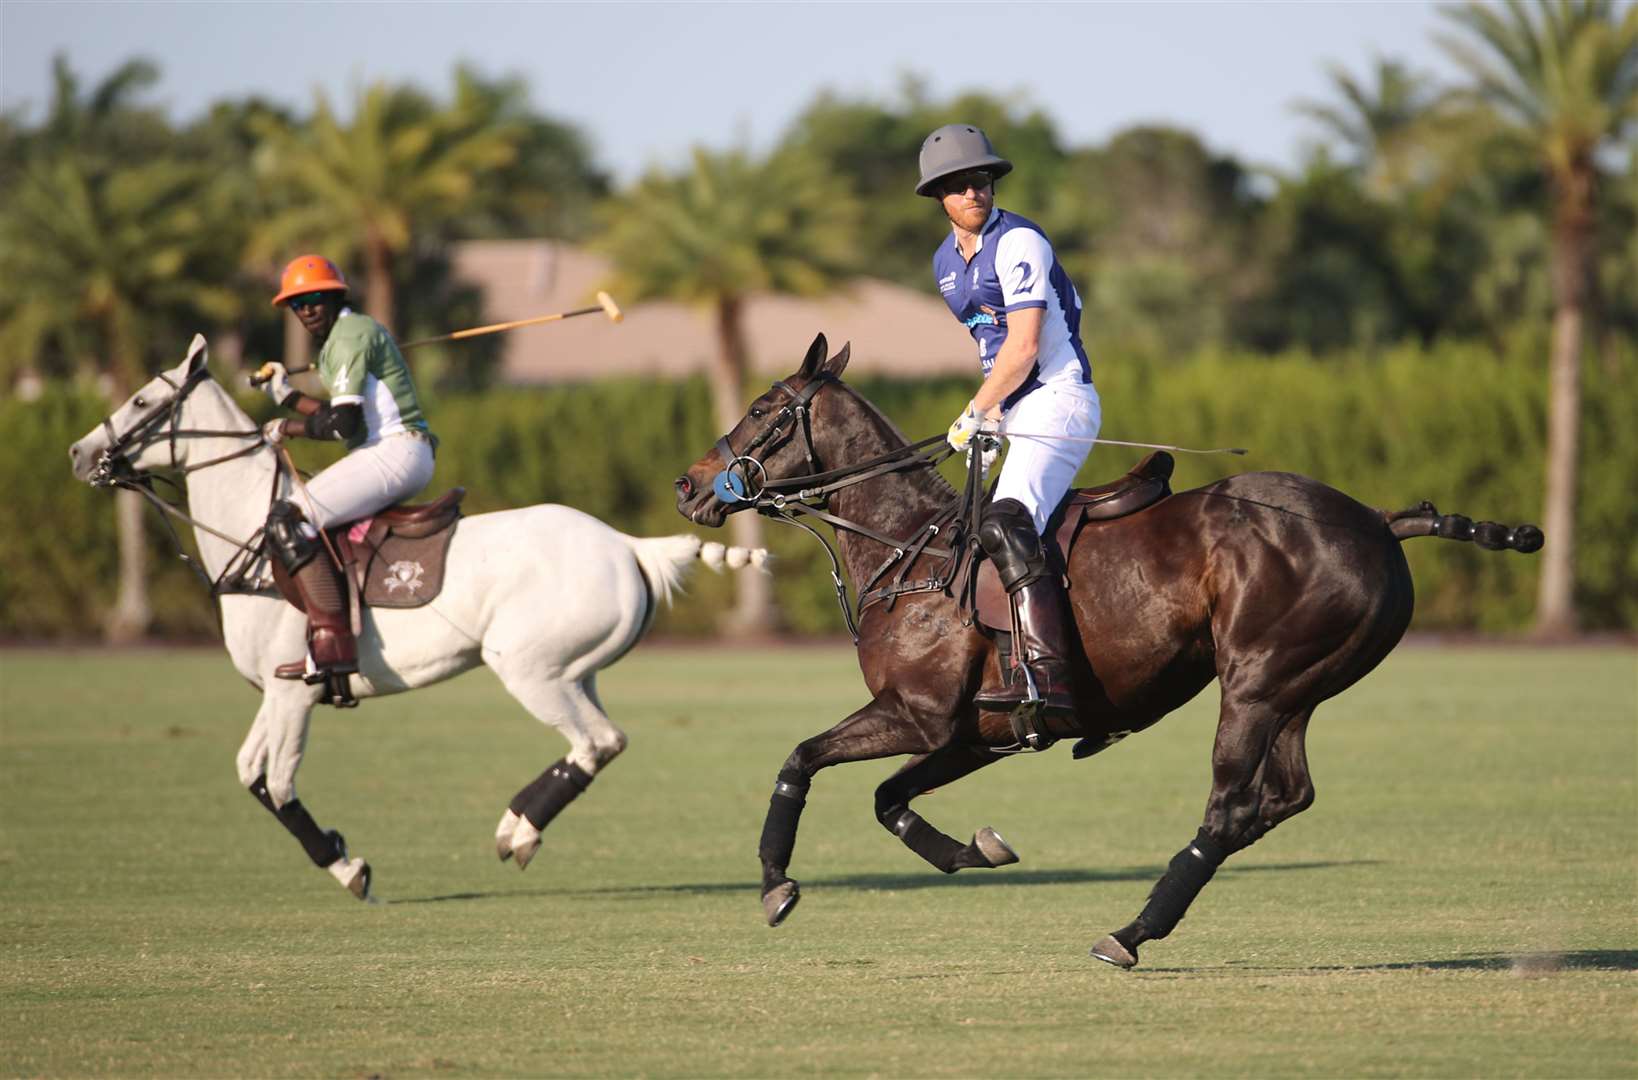 The duke (right) plays in a polo match during the Royal Salute Polo Challenge (Yaroslav Sabitov/PA)